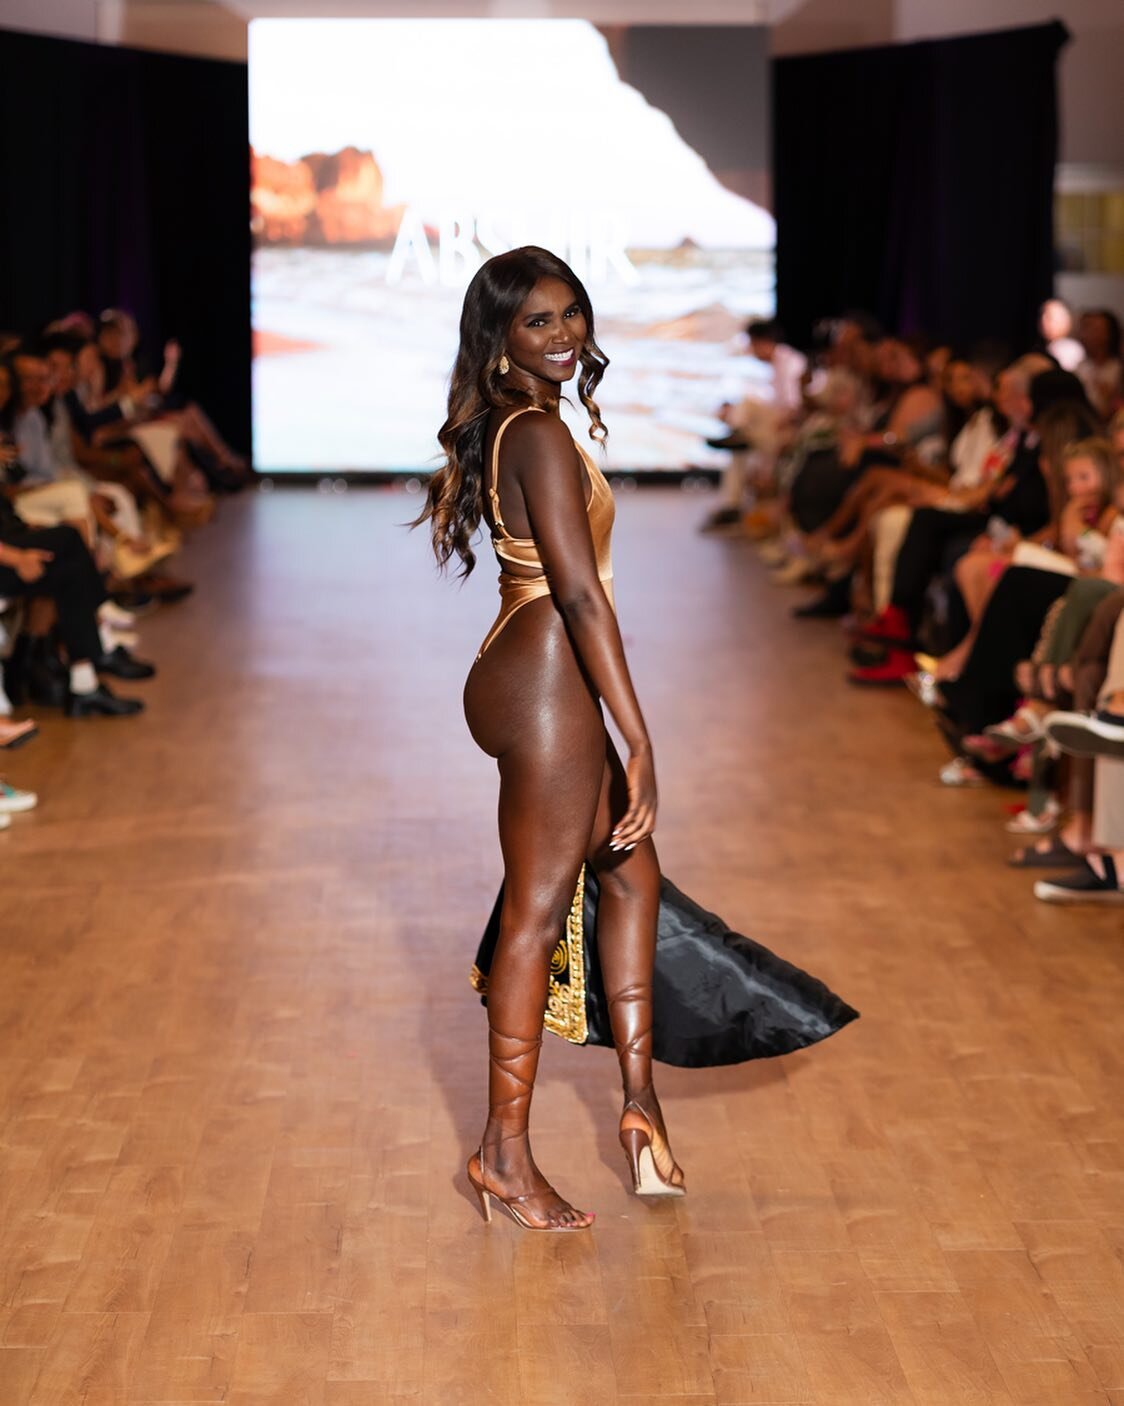 The radiant Queen Eyga gracing the runway ❤️&zwj;🔥❤️&zwj;🔥❤️&zwj;🔥 closing for Abshir, in her custom look at @sdswimweek 🔥
Grateful 💛 
📸 @timwothy